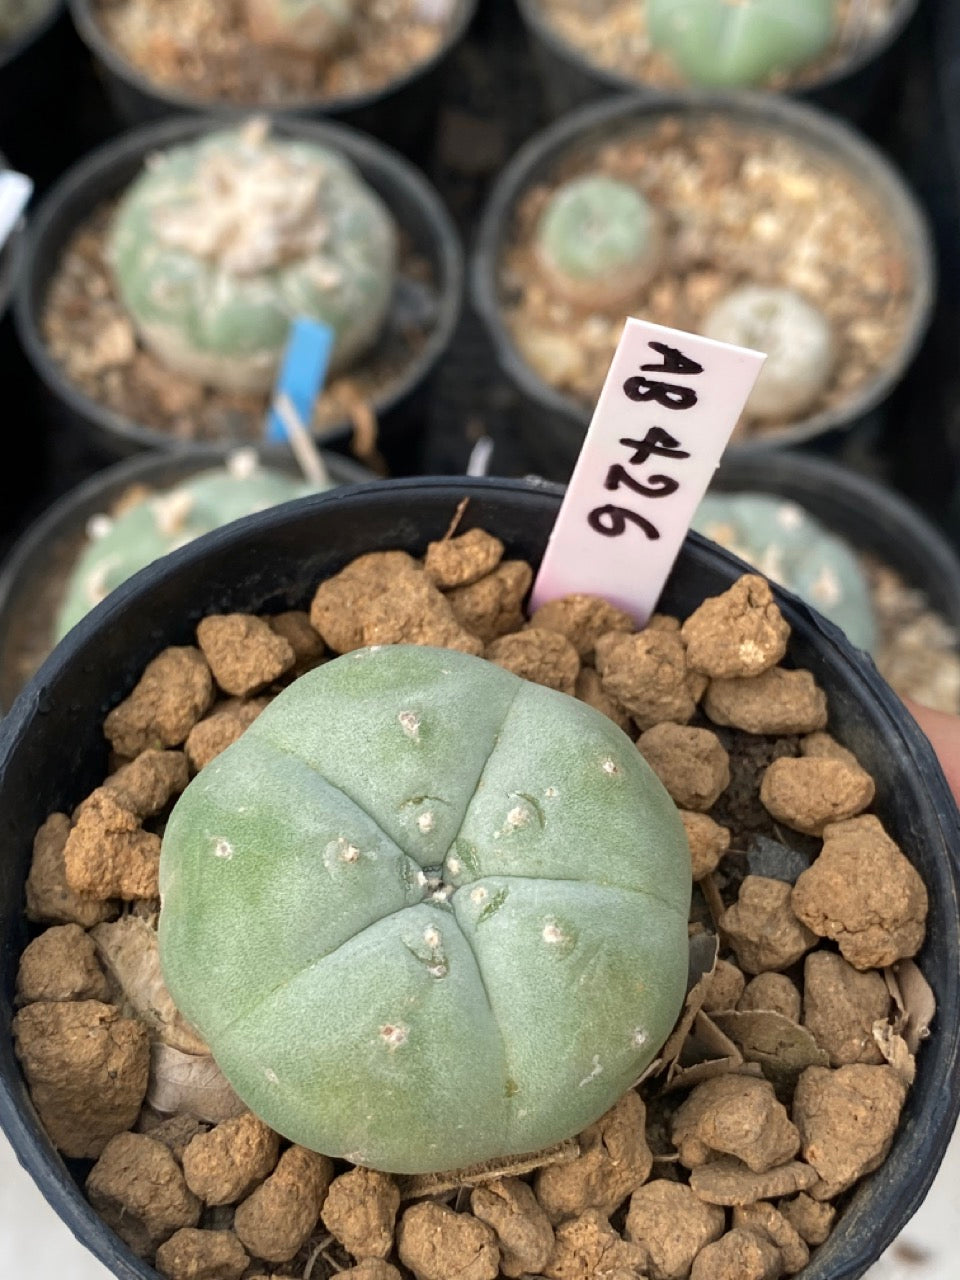 Lophophora williamsii size 3-4 cm own root